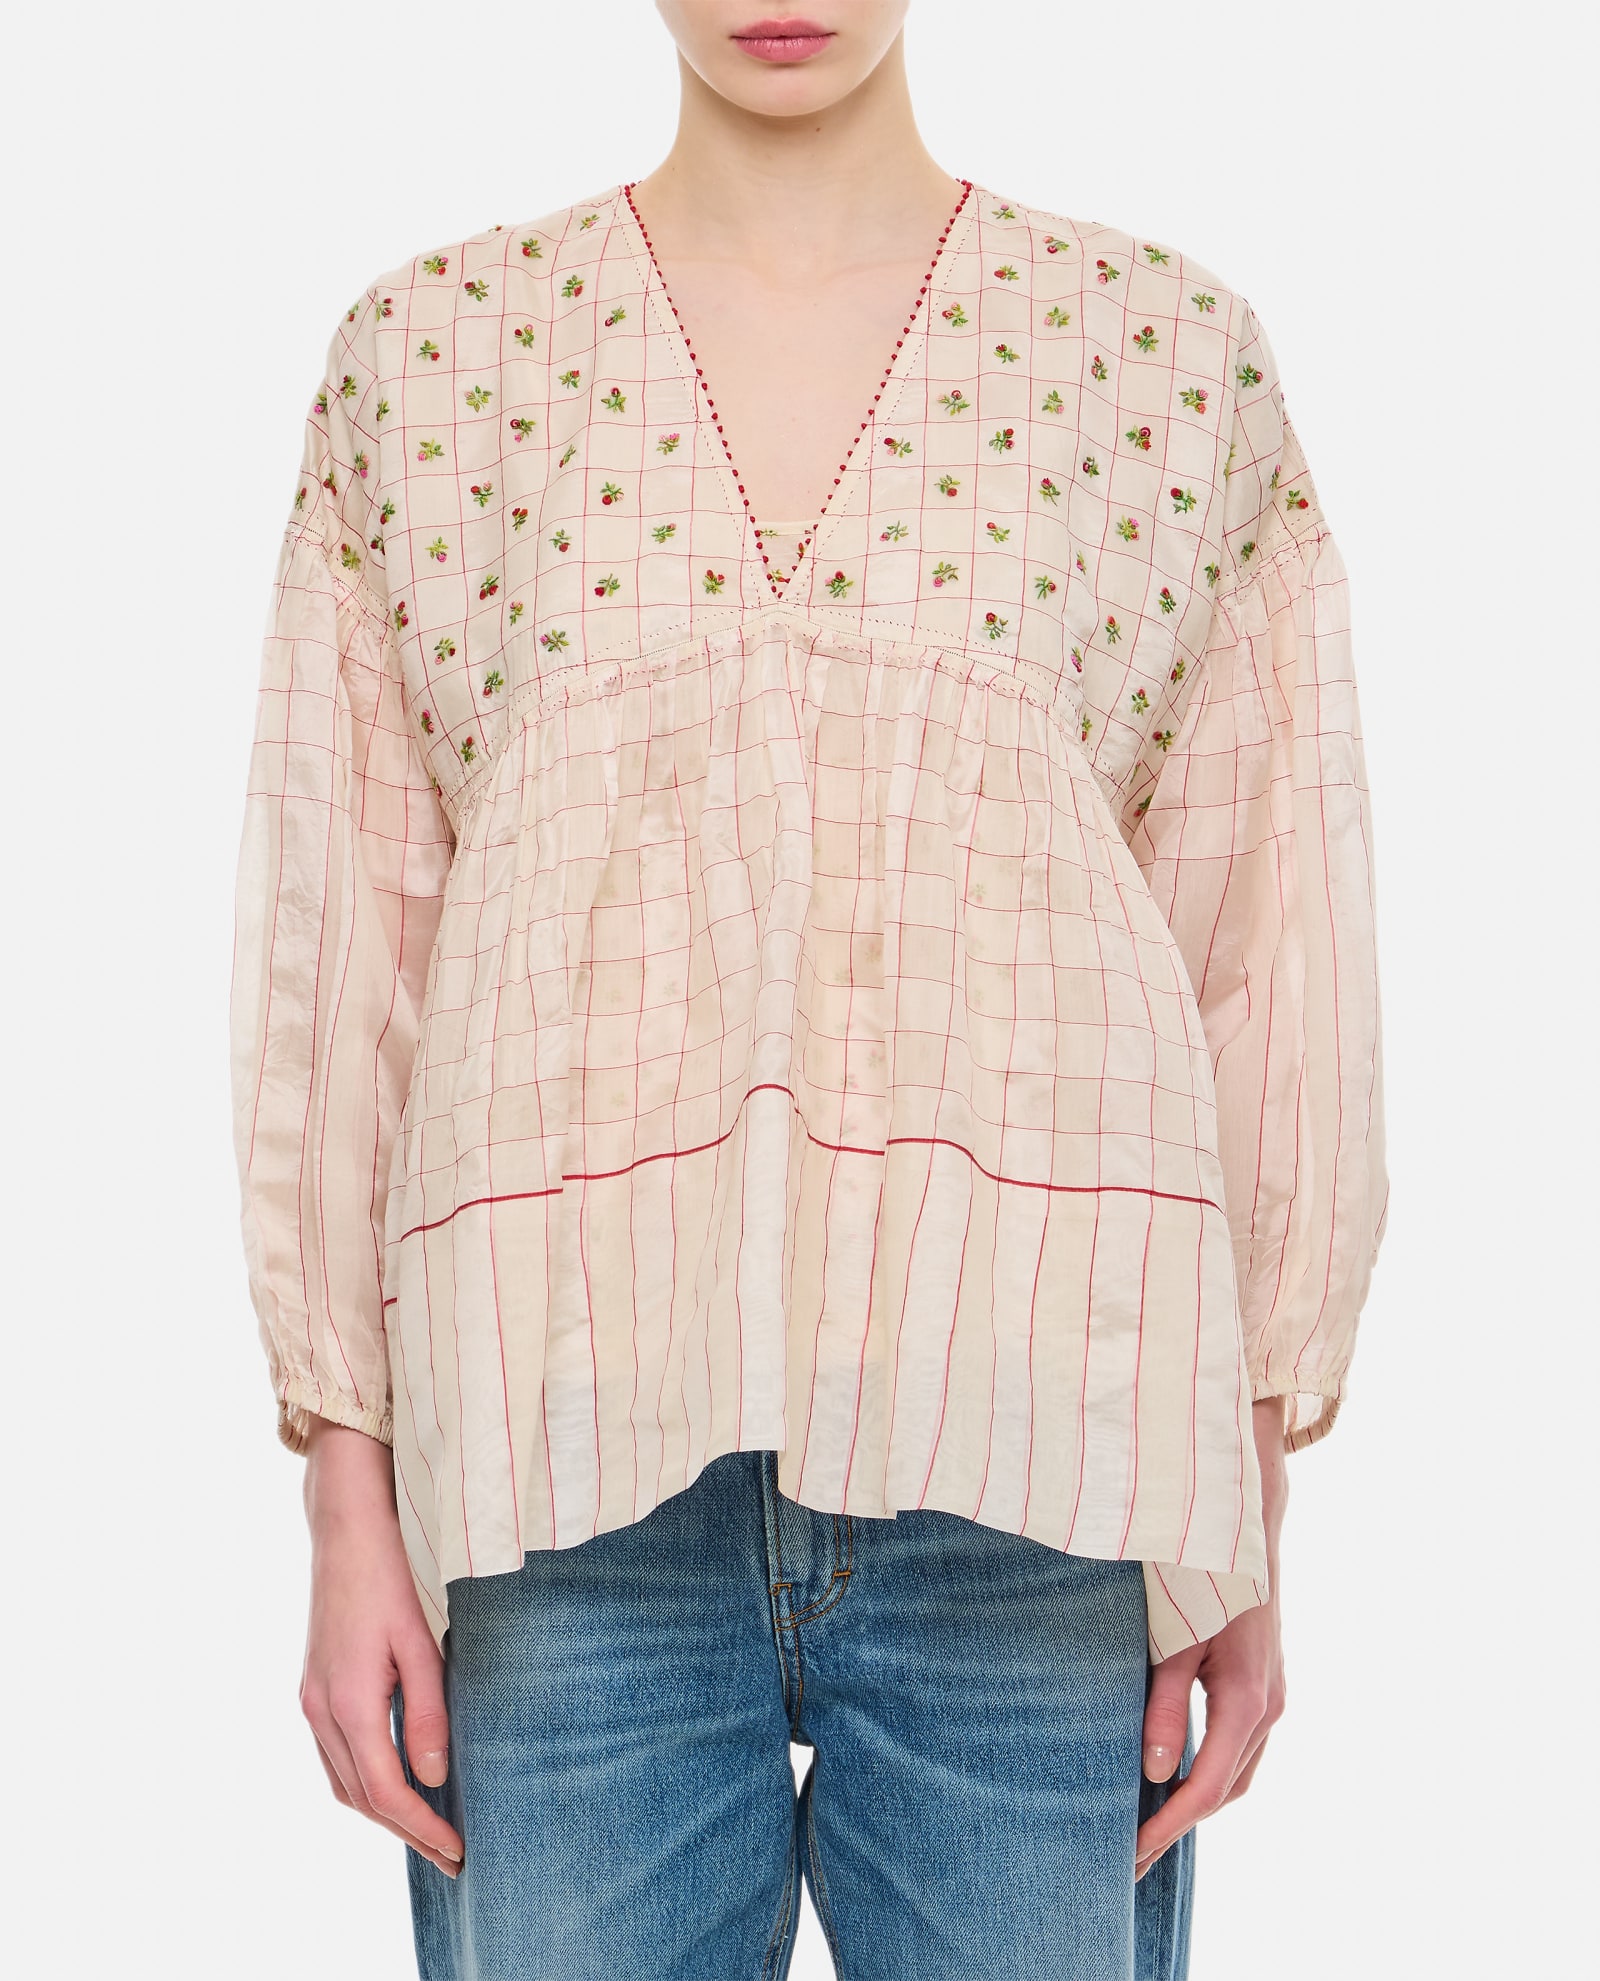 Embroidered Balloon Sleeves Blouse